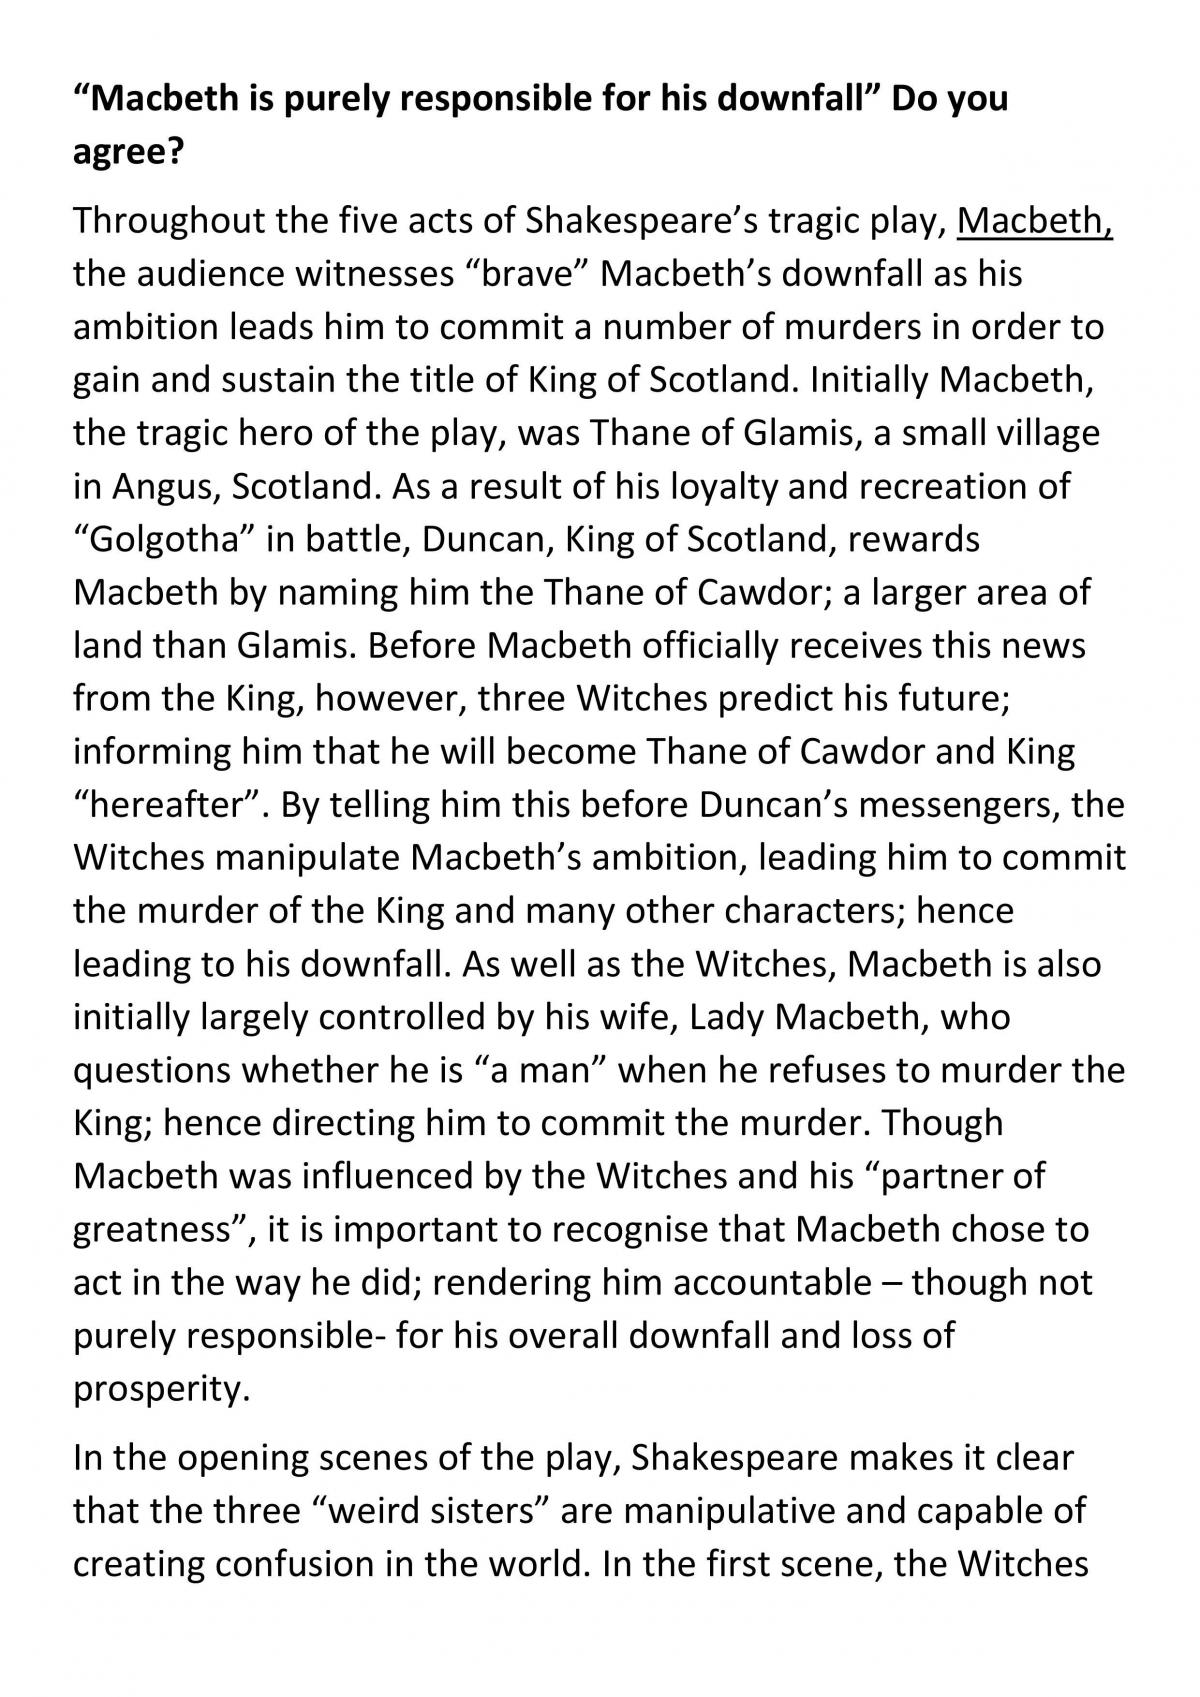 macbeth is responsible for his downfall essay